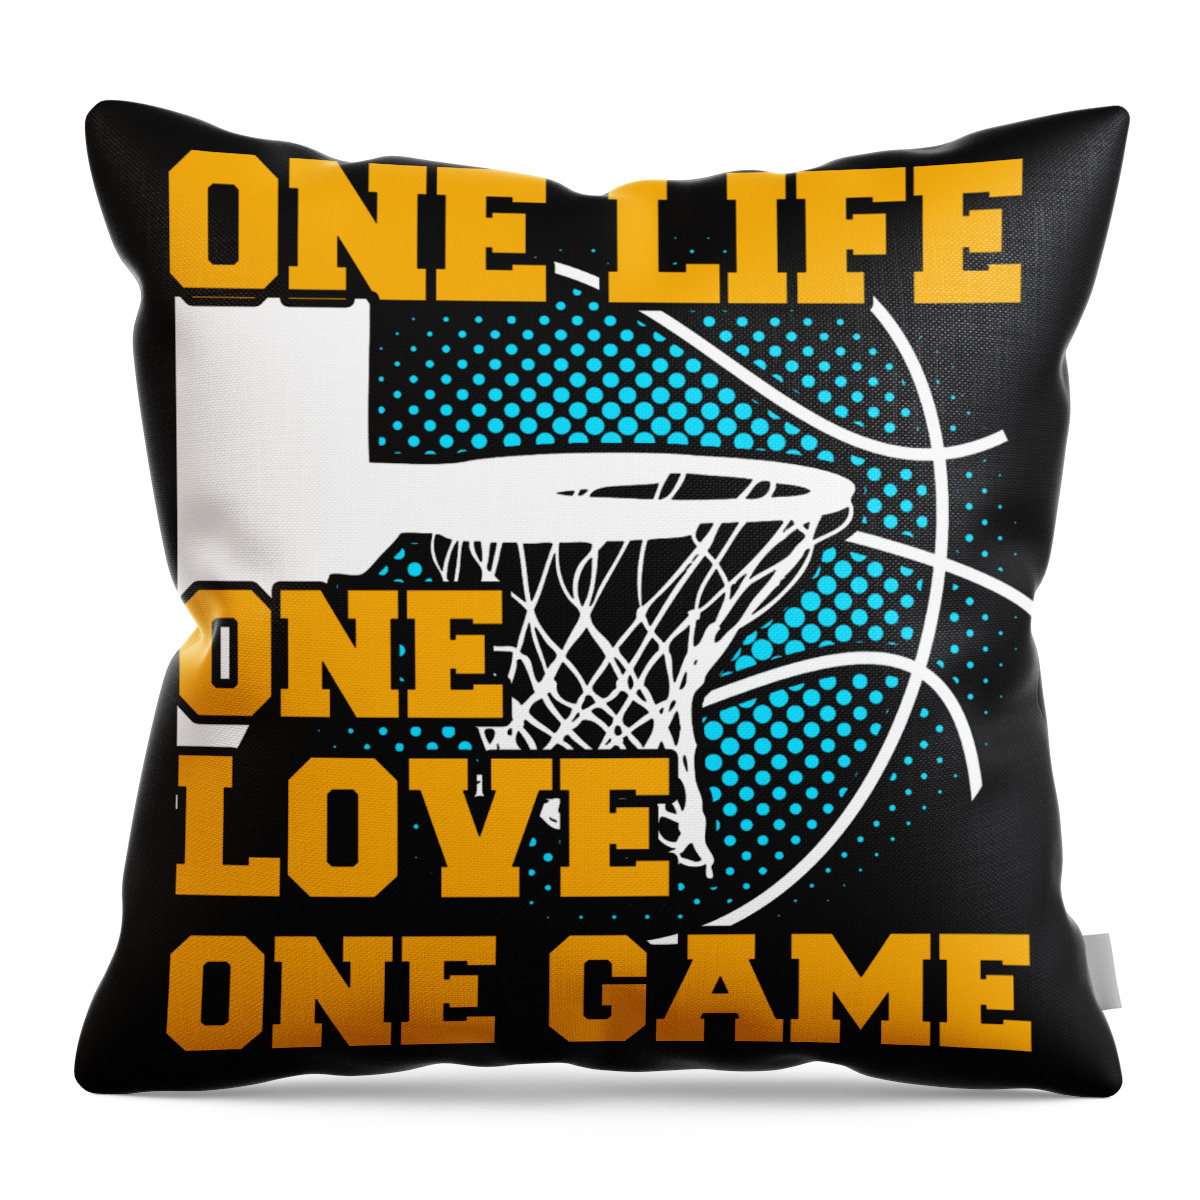 Basketball - one game one love